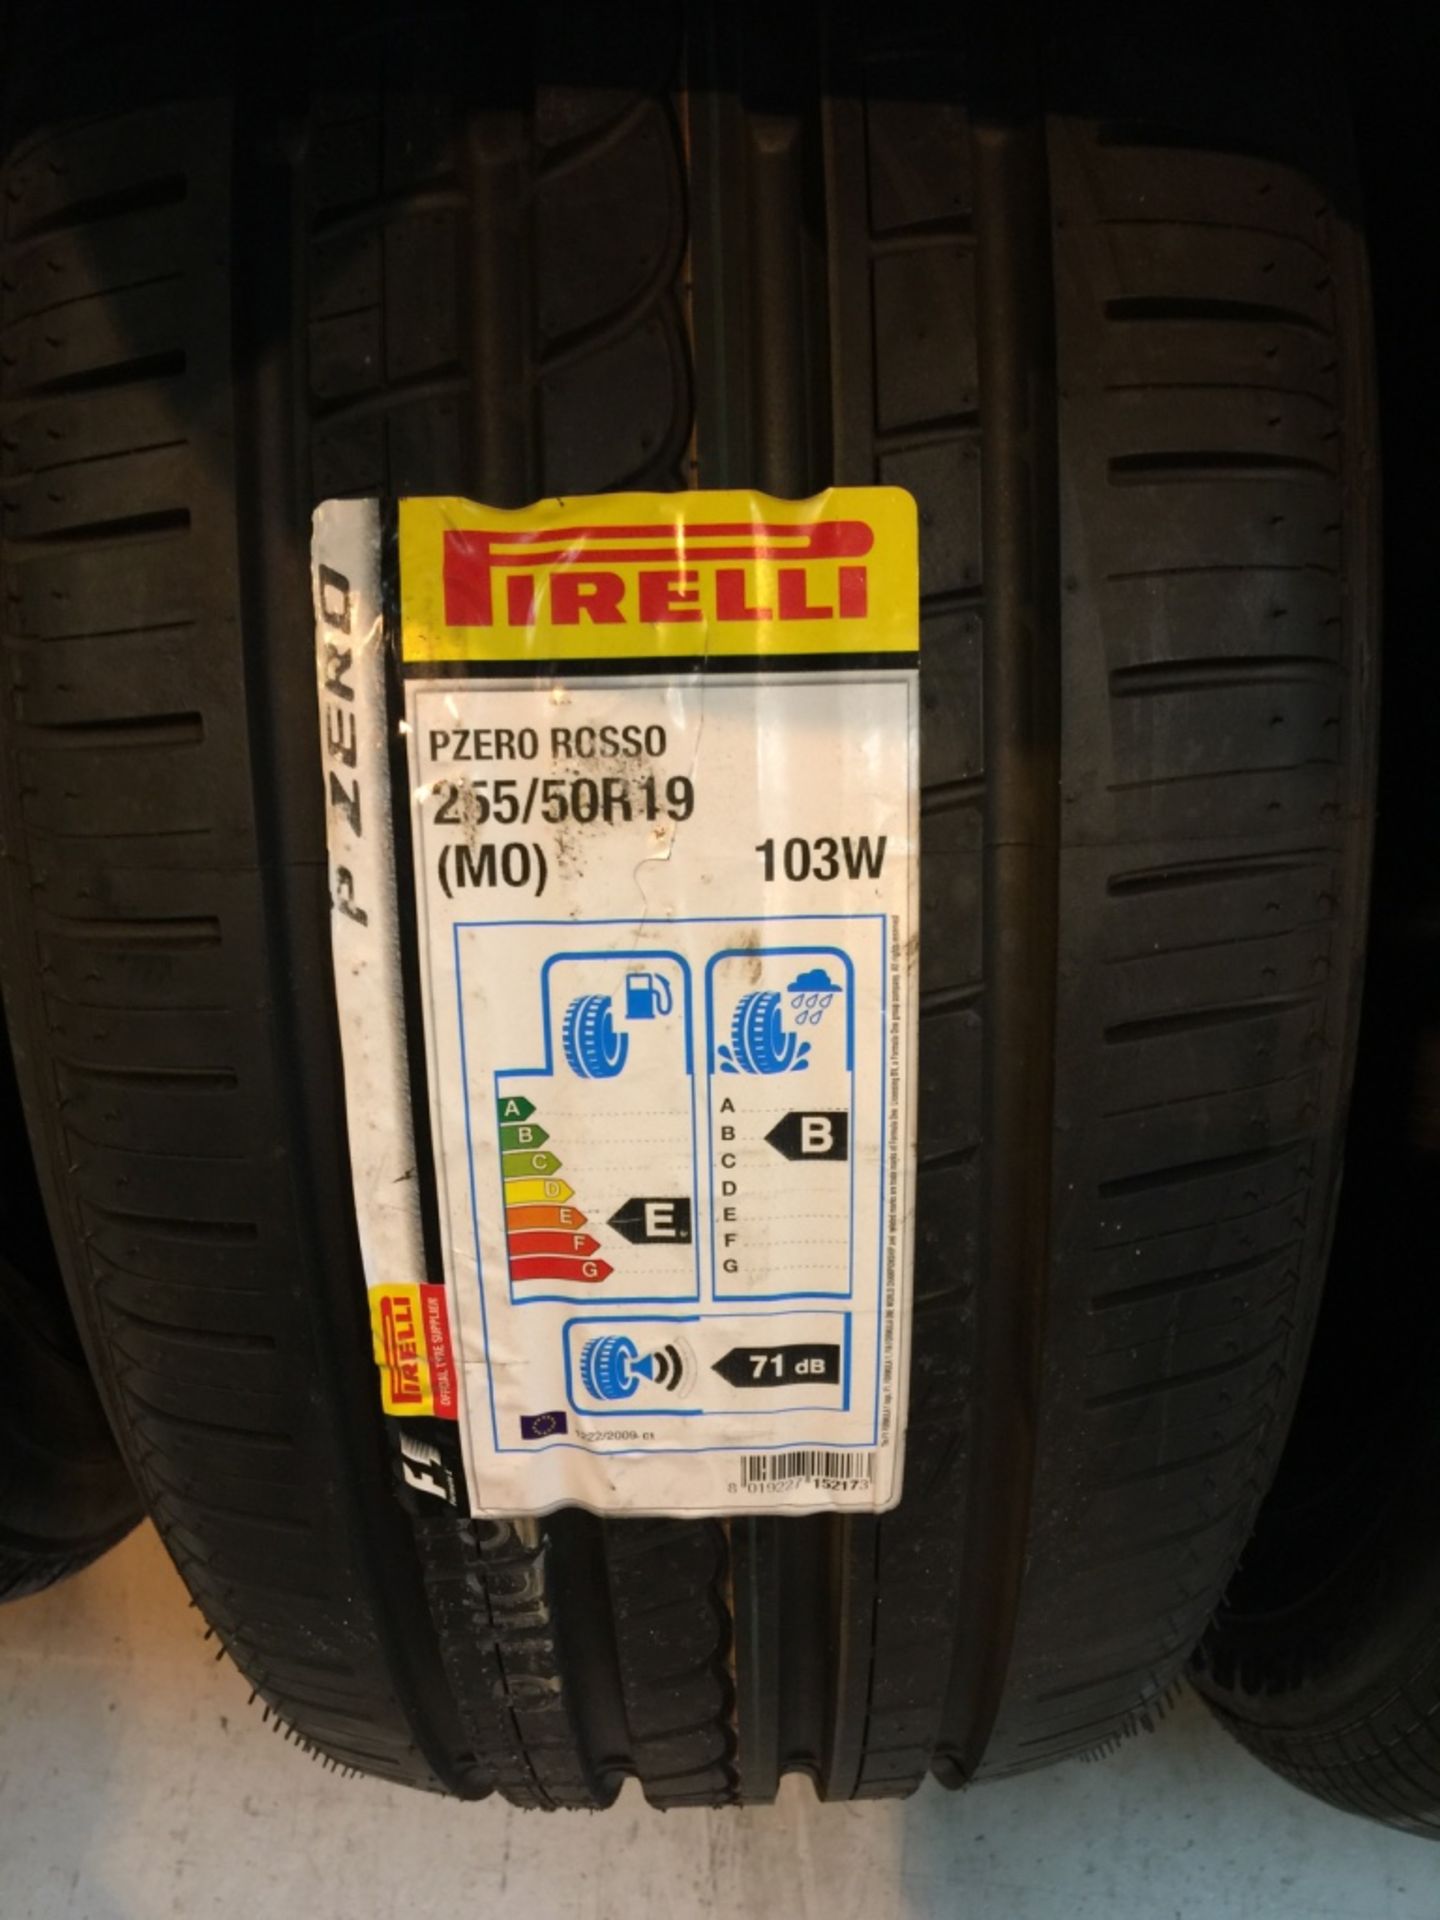 54: Pirelli Tyres Car & 4X4 - Many Large Sizes to include 18,19,21" Please see further Pictures ( - Image 41 of 55